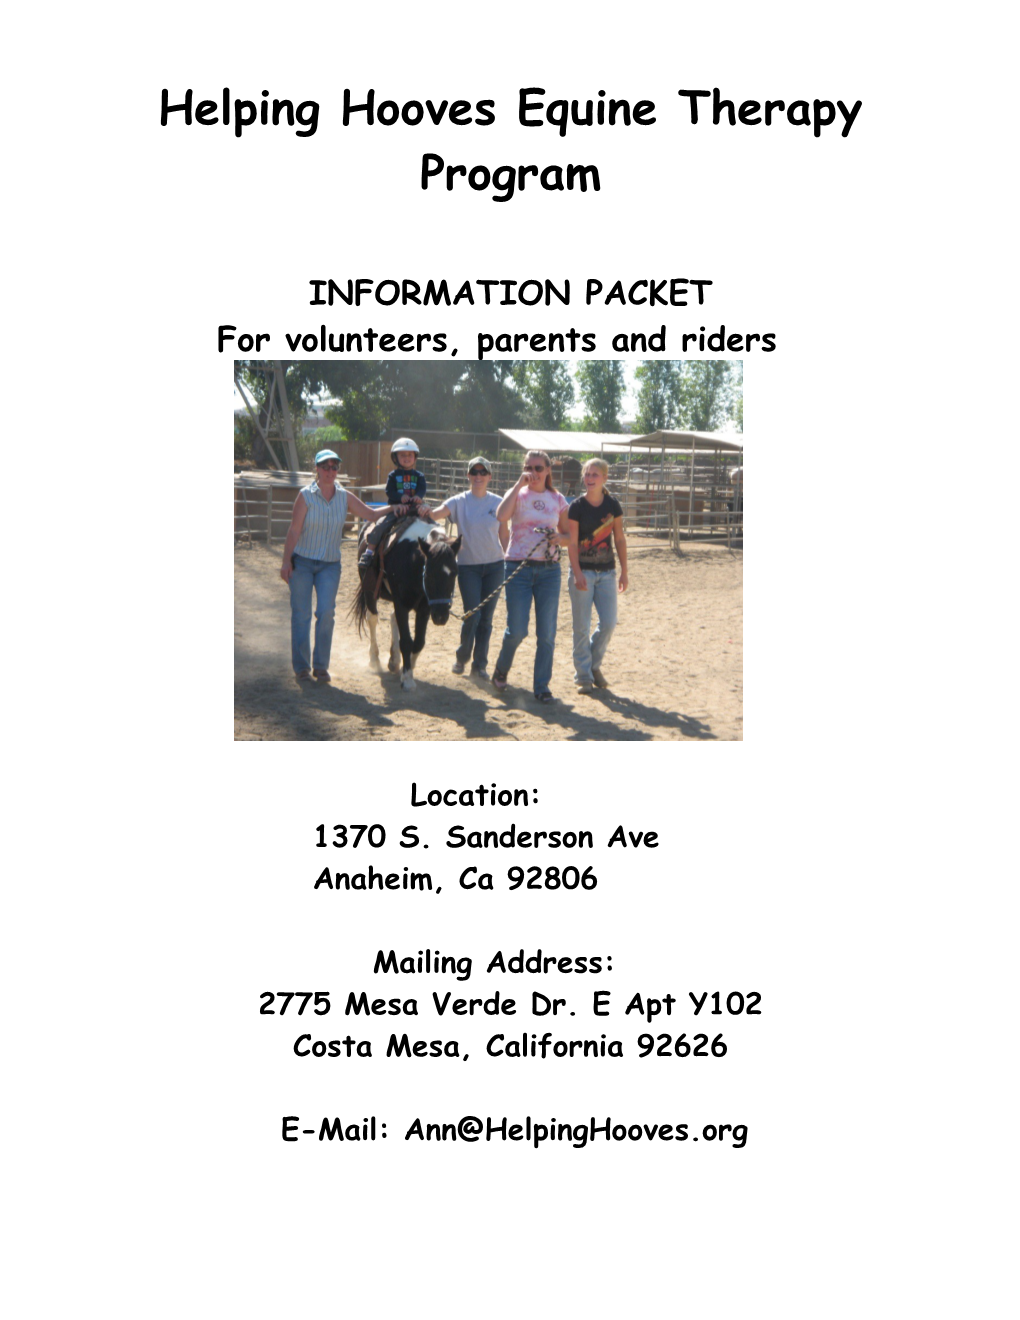 Helping Hooves Equine Therapy Program